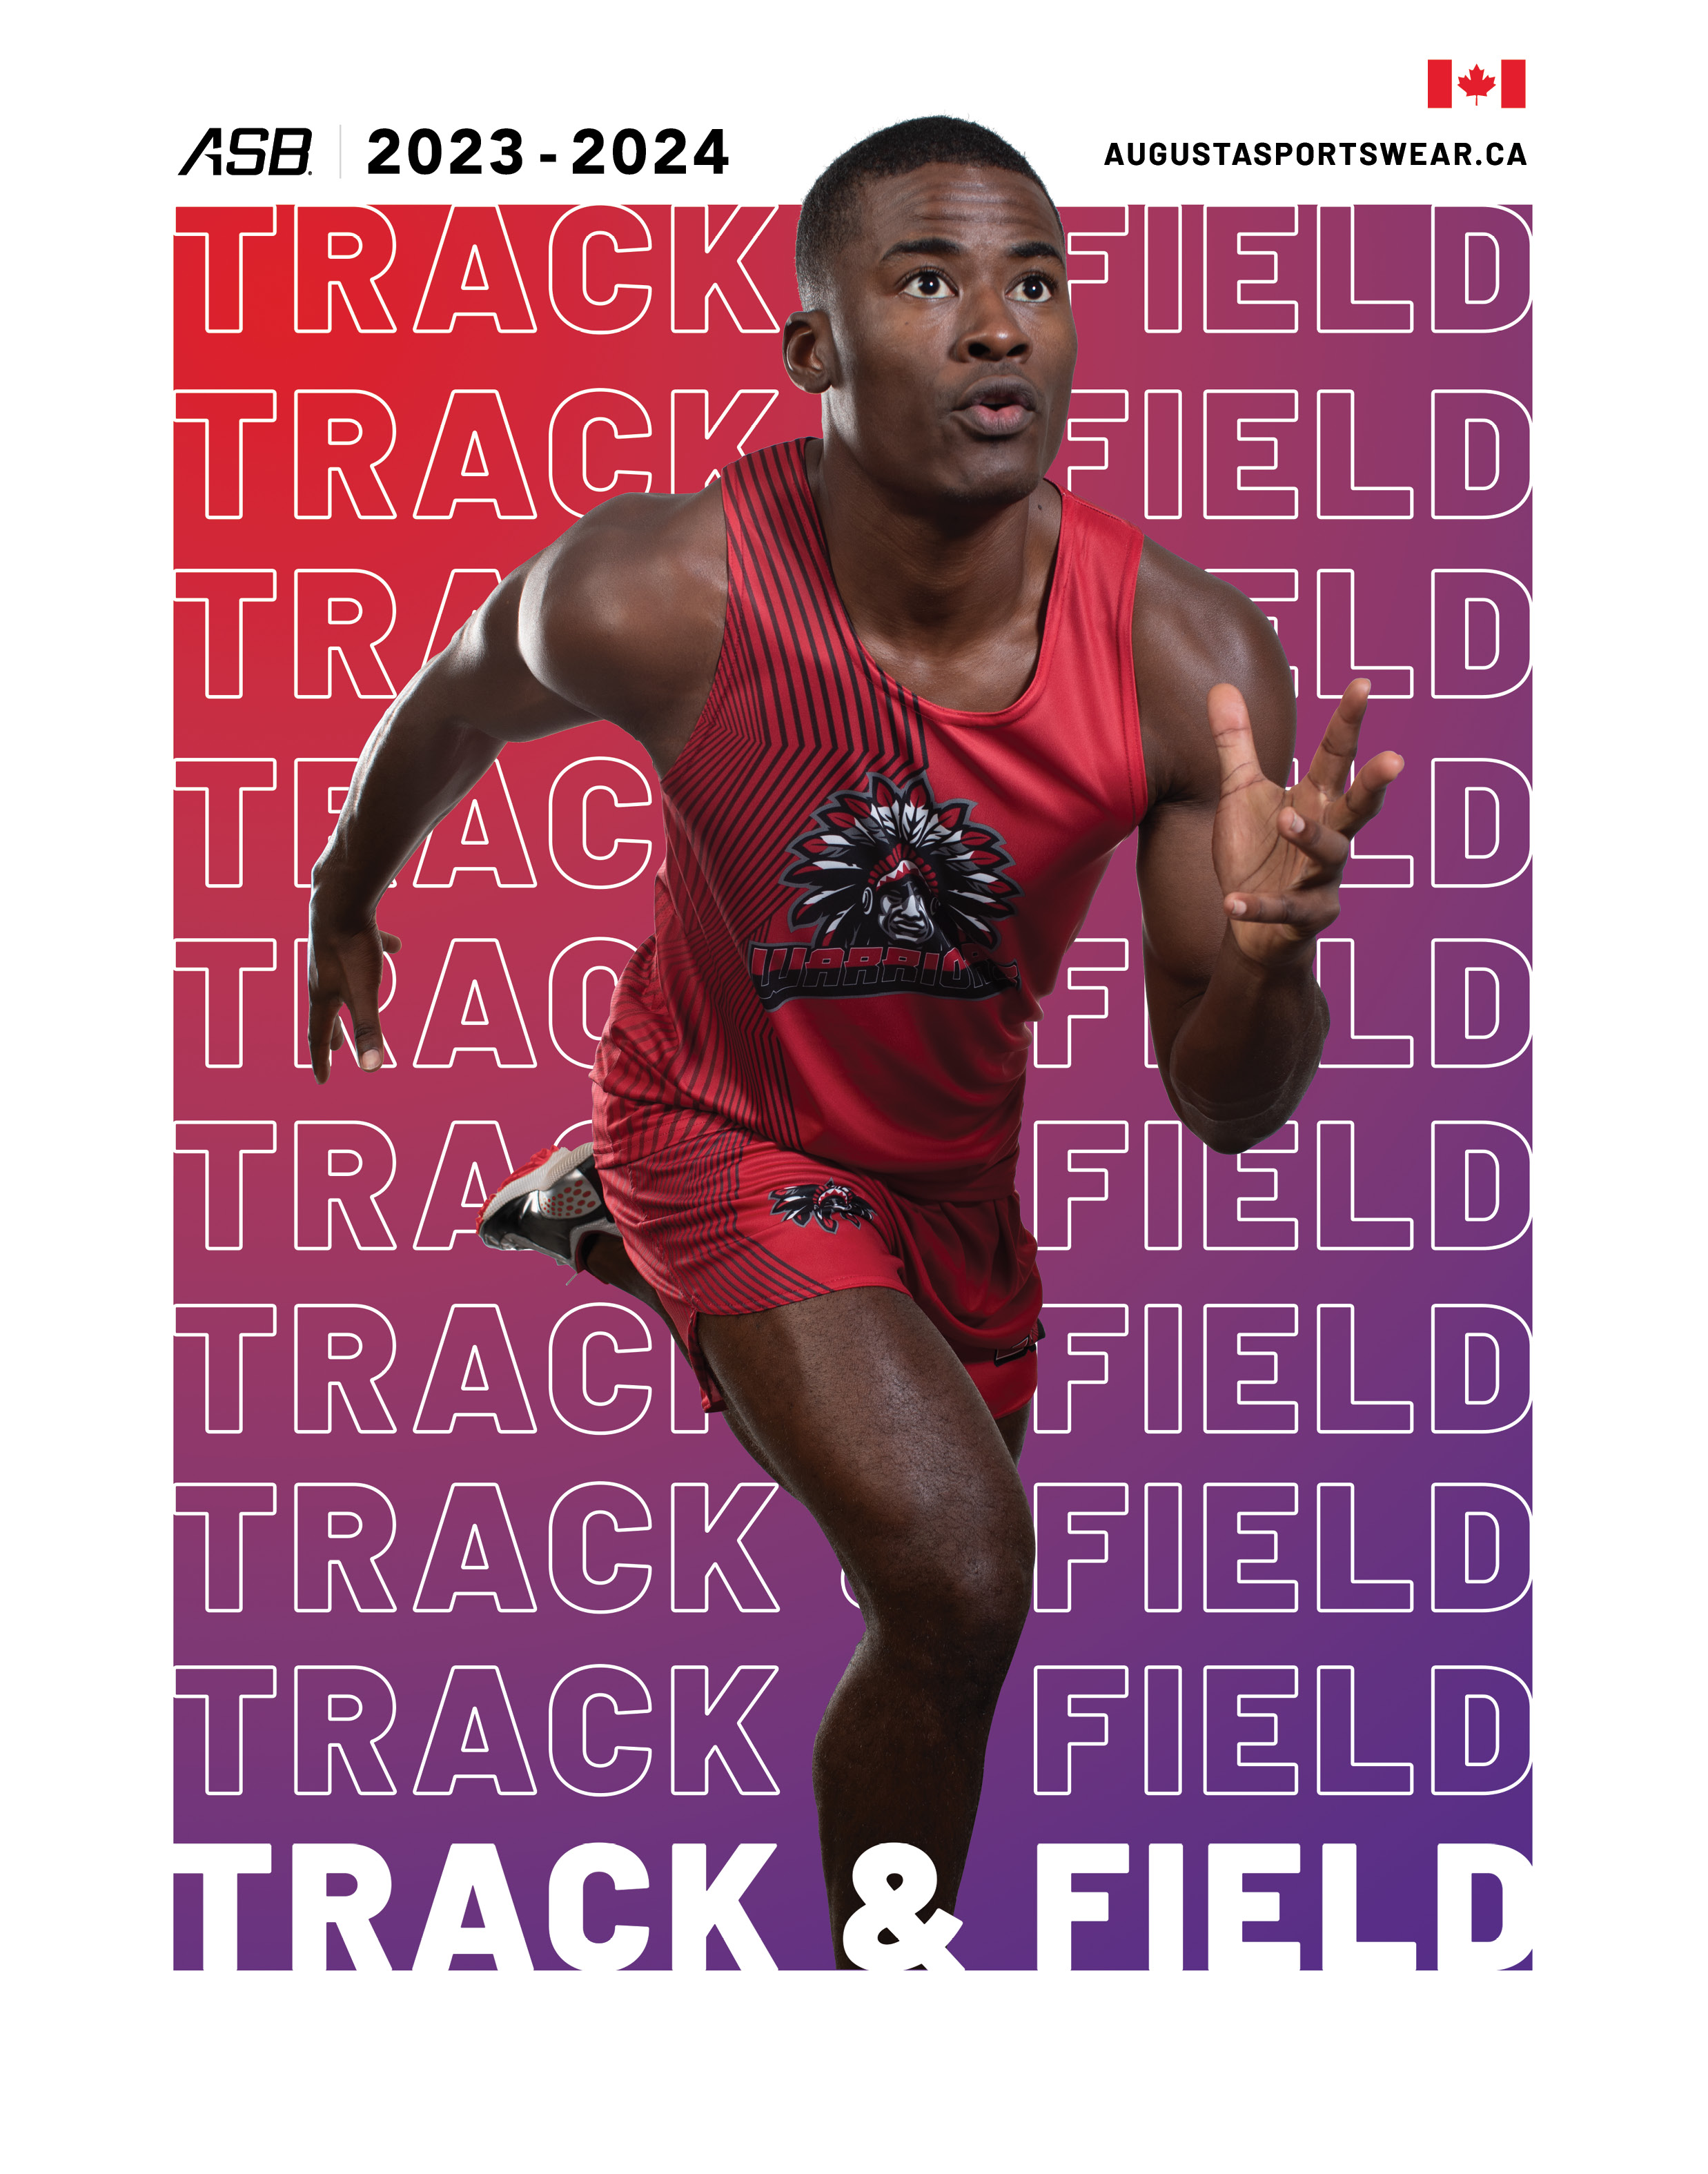 Track & Field Catalog 2023 to 2024